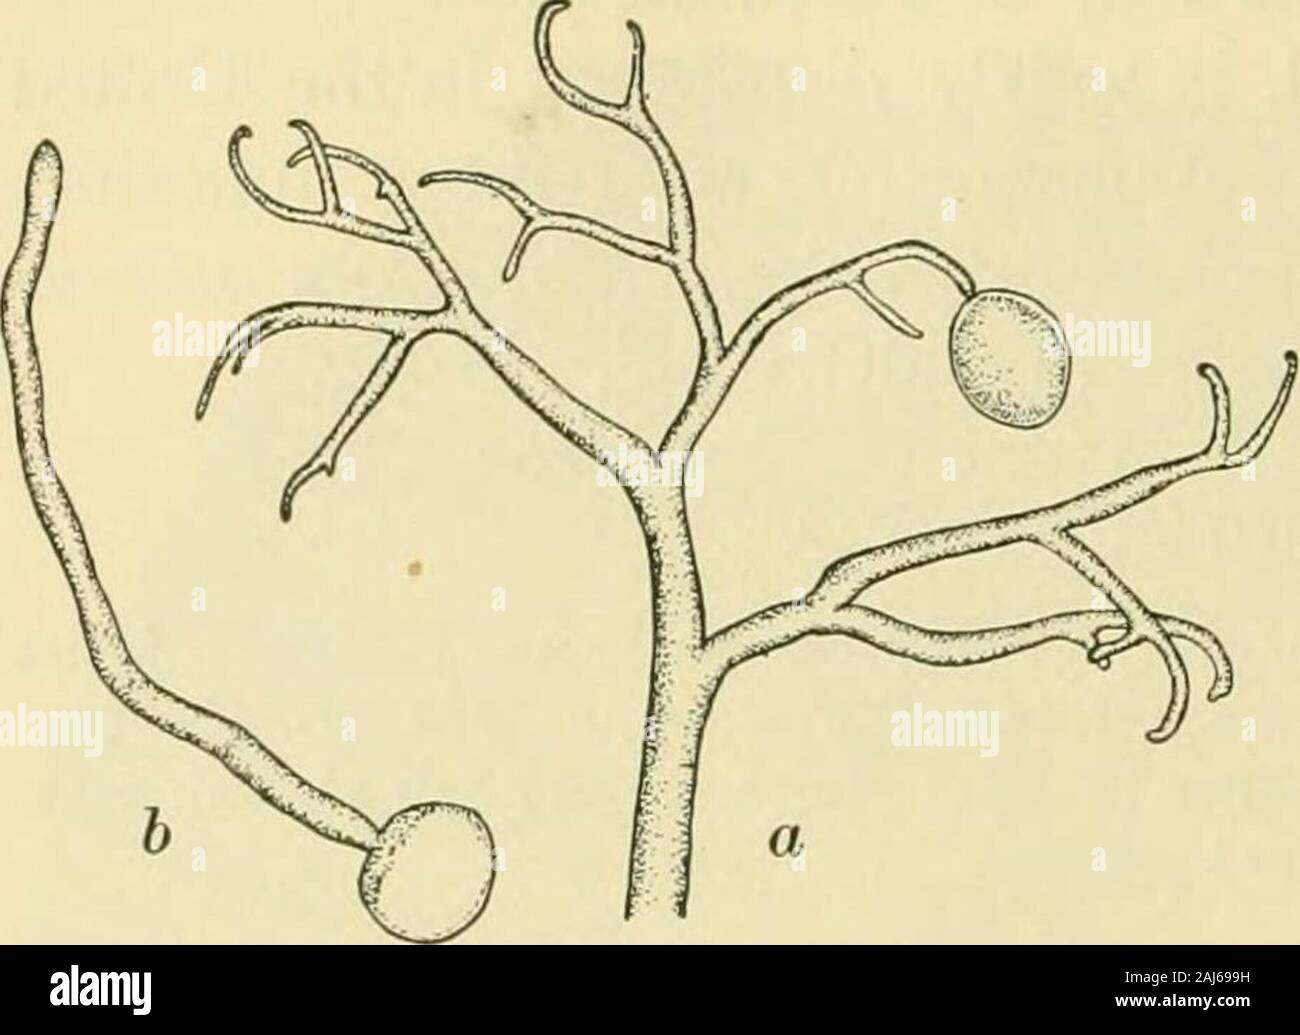 Fungous diseases of plants . tion of Peronospora parasitica. Ann.Bot. 14: 263-279. pi. 26. 1900. This fungus seems to be particularly abundant in England, butit is also found in other parts of Europe and in the United States.Practically all cultivated Cruciferae are more or less subject to it, l62 FUNGOUS DISEASES OF PLANTS as well as many wild species. It frequently causes stem deformi-ties, and in England it is often associated with Cystopiis candidiis on Capsella, while in thiscountry it is perhaps bestknown as a pest in cauli-flower culture under glass,yet occasionally destructivein cabbag Stock Photo